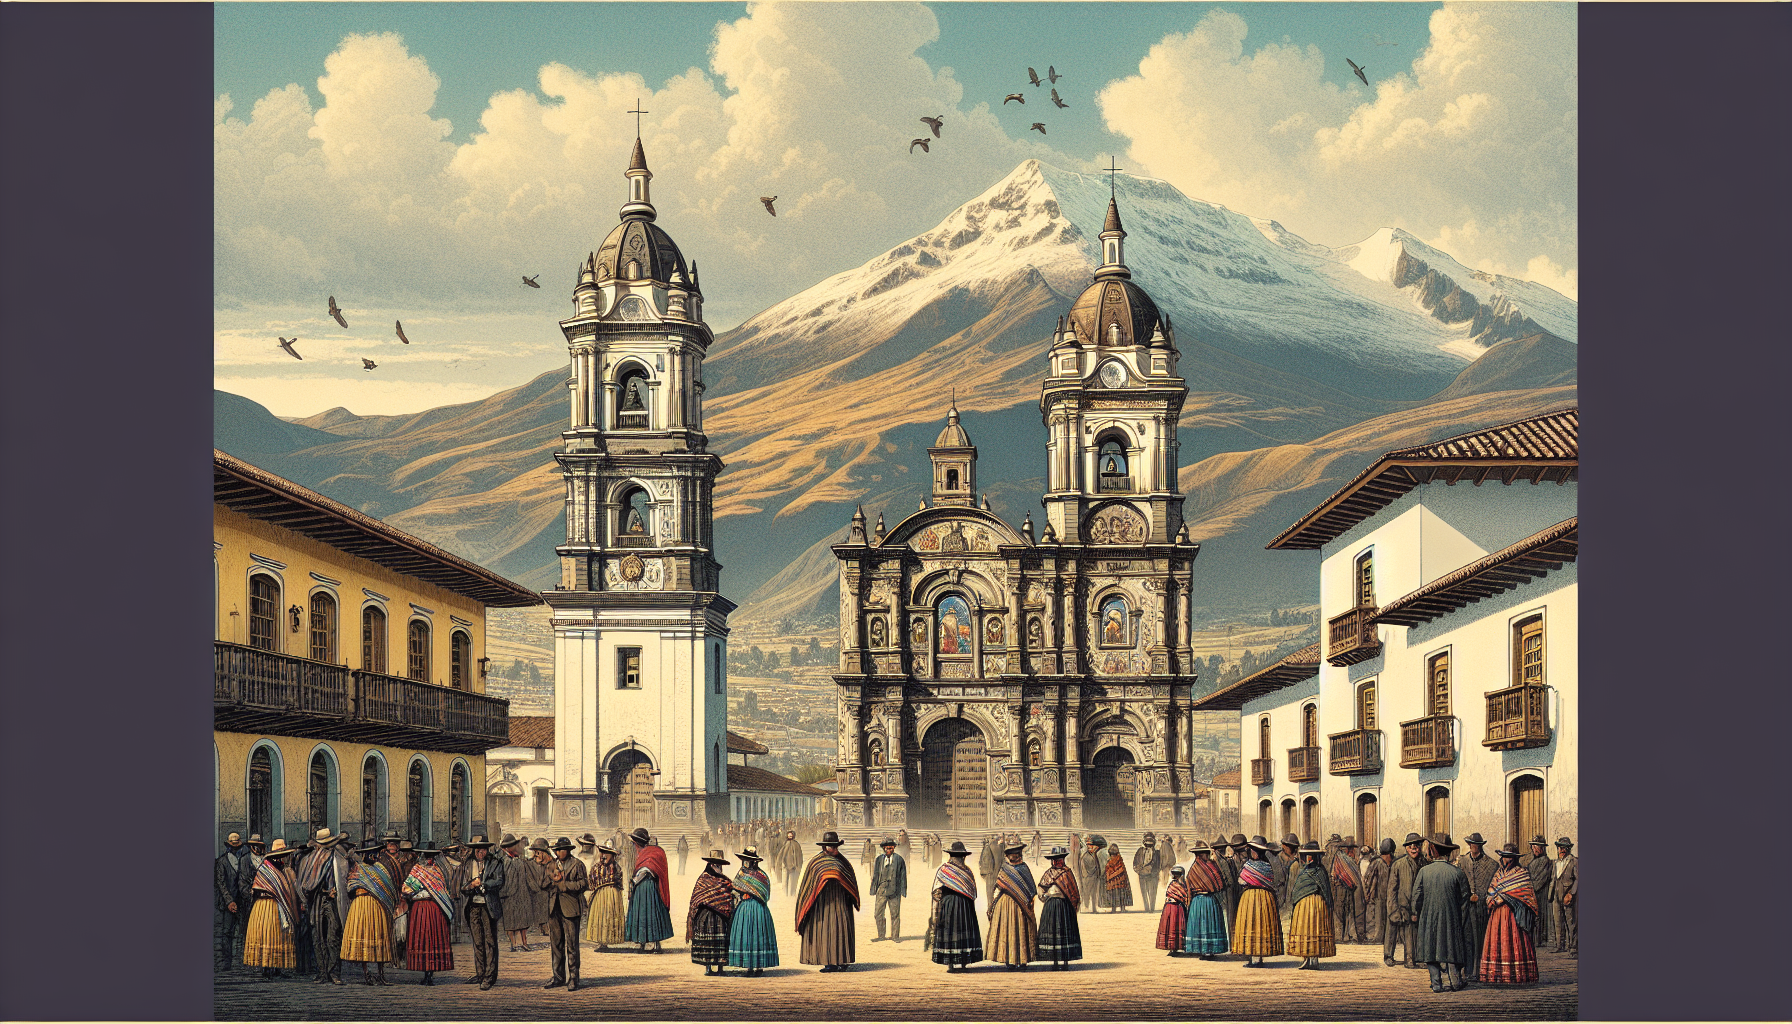 Create an image of the historic churches in Riobamba, Ecuador, showcasing their stunning colonial architecture. Include vibrant details like intricate façades, bell towers, and a picturesque backdrop